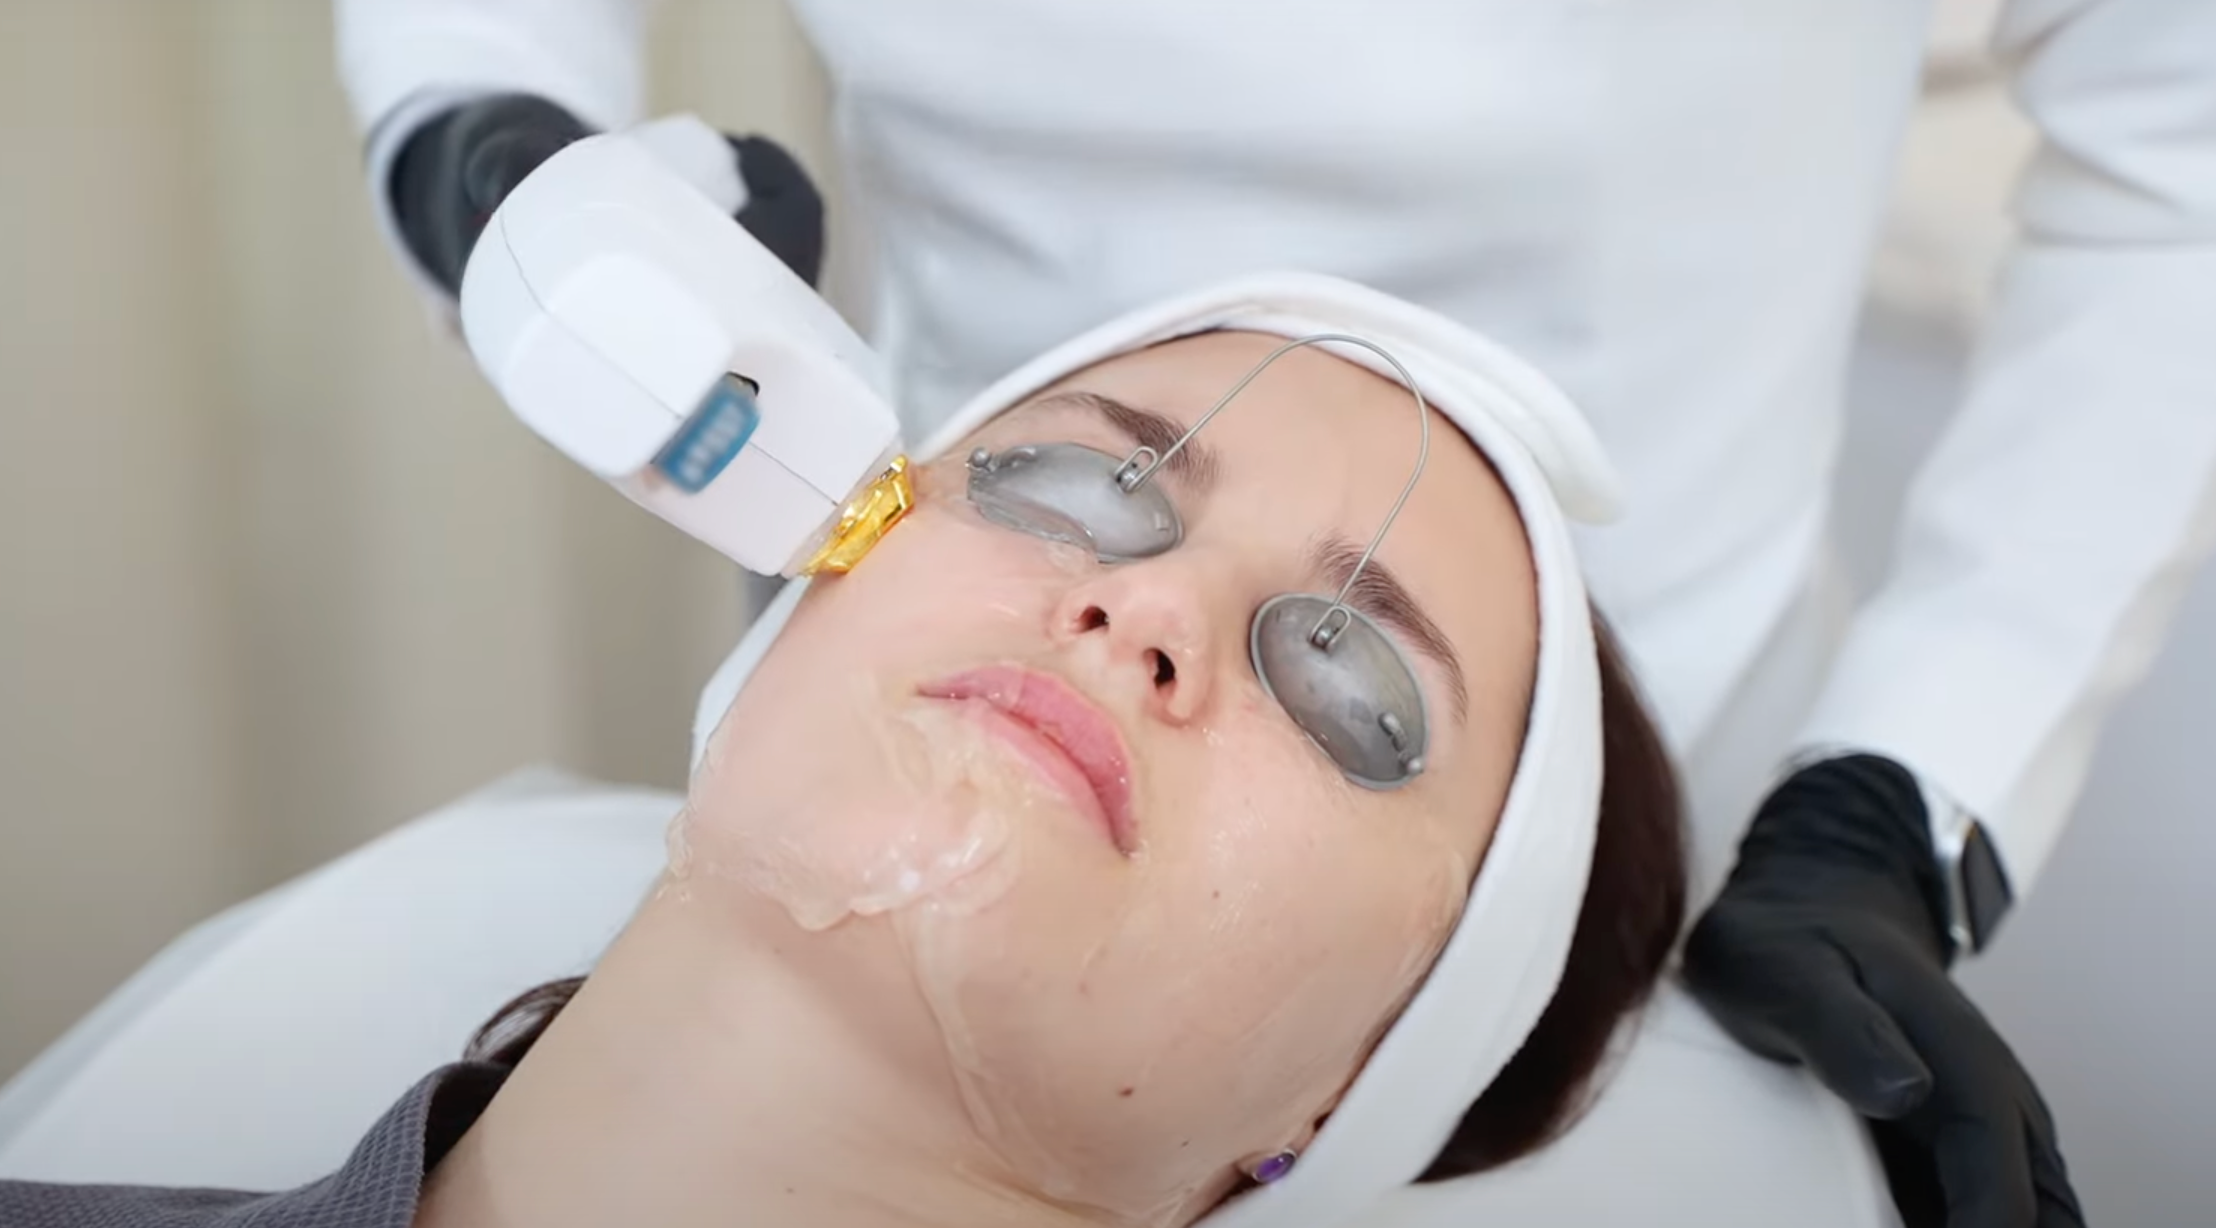 Cheap Cosmetic Laser IPL Safety Courses. Are they worth it?